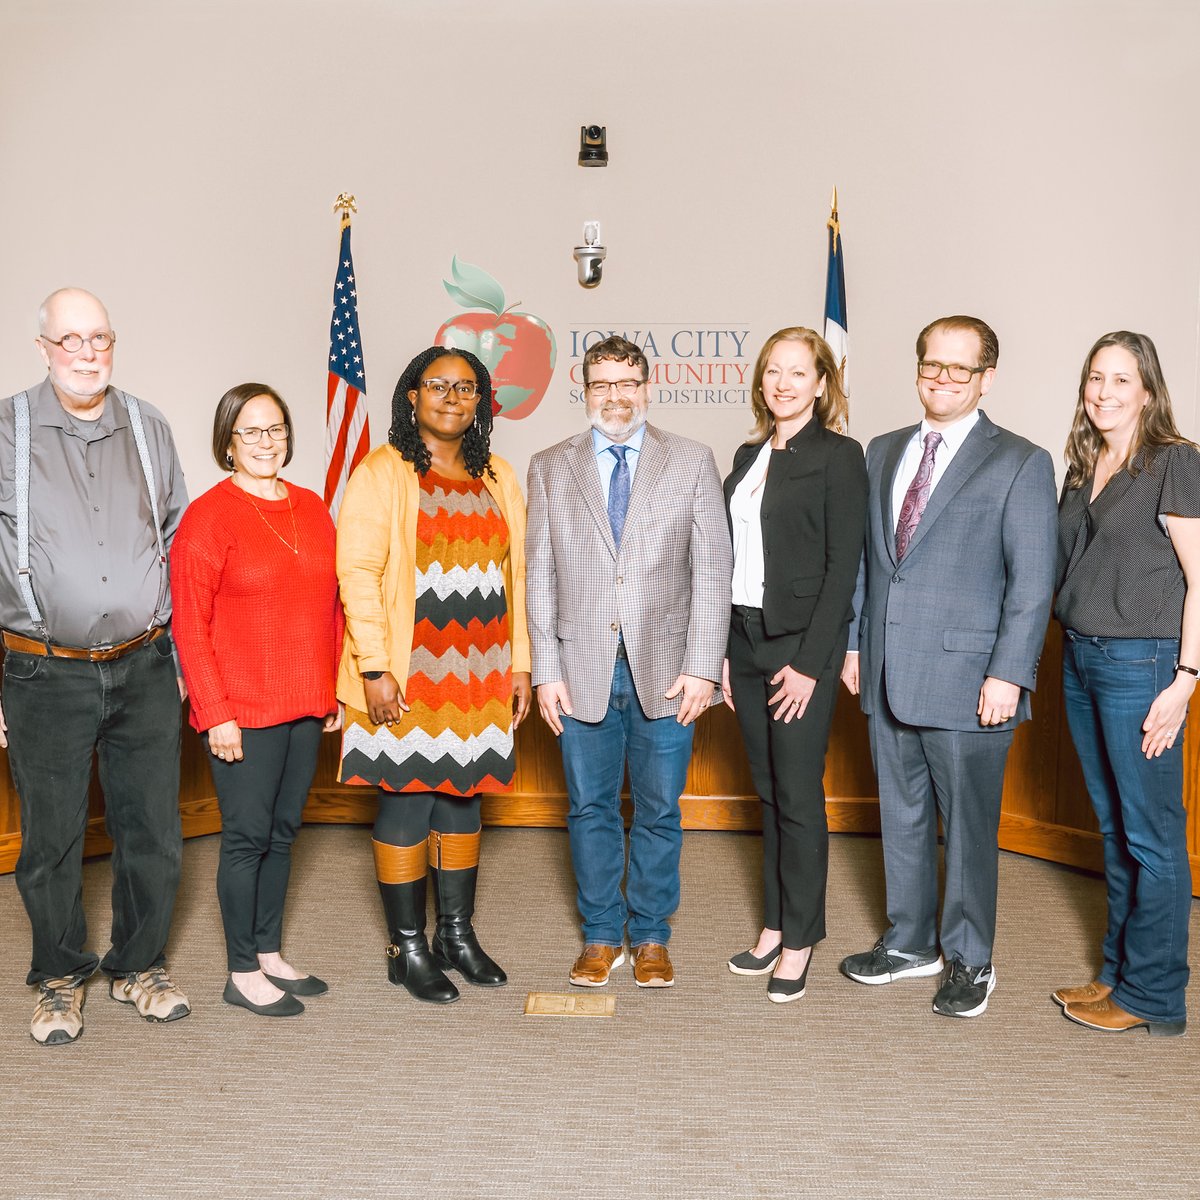 May is #SchoolBoardRecognitionMonth and we want to extend a heartfelt thank you to our dedicated school board members. Your commitment benefits our students, staff, and community every day. Thank you for your service and your leadership. #SchoolBoardAppreciation #ThankYou